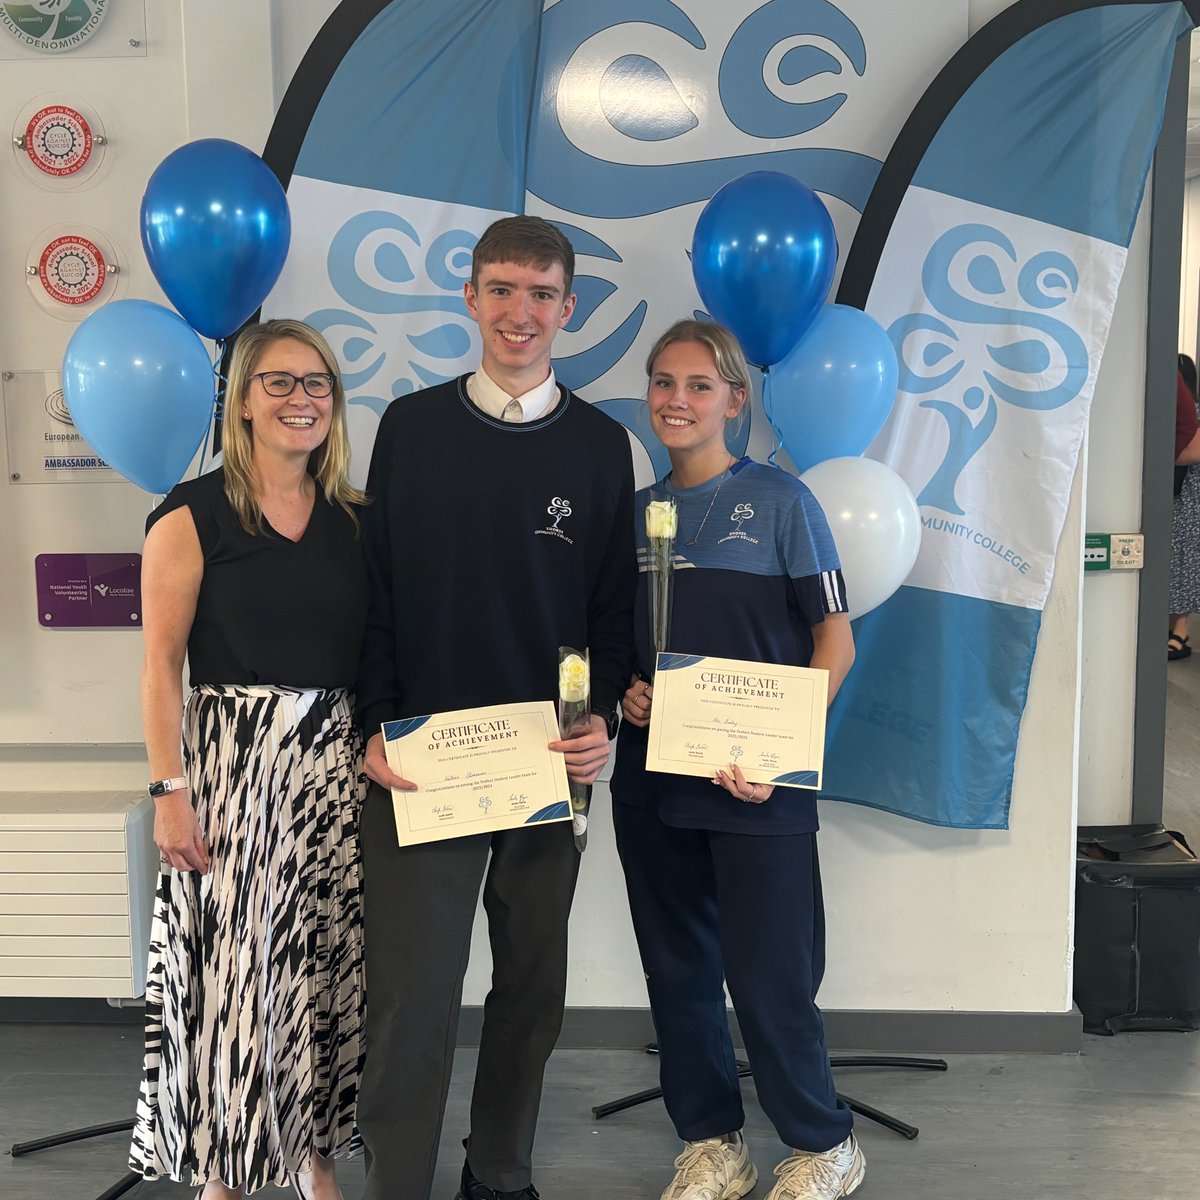 Our newly elected Deputy Head Boy and Deputy Head Girl pictured here with Príomhoide Aoife. 💙 #Congratulations #weareSCC #teamddletb